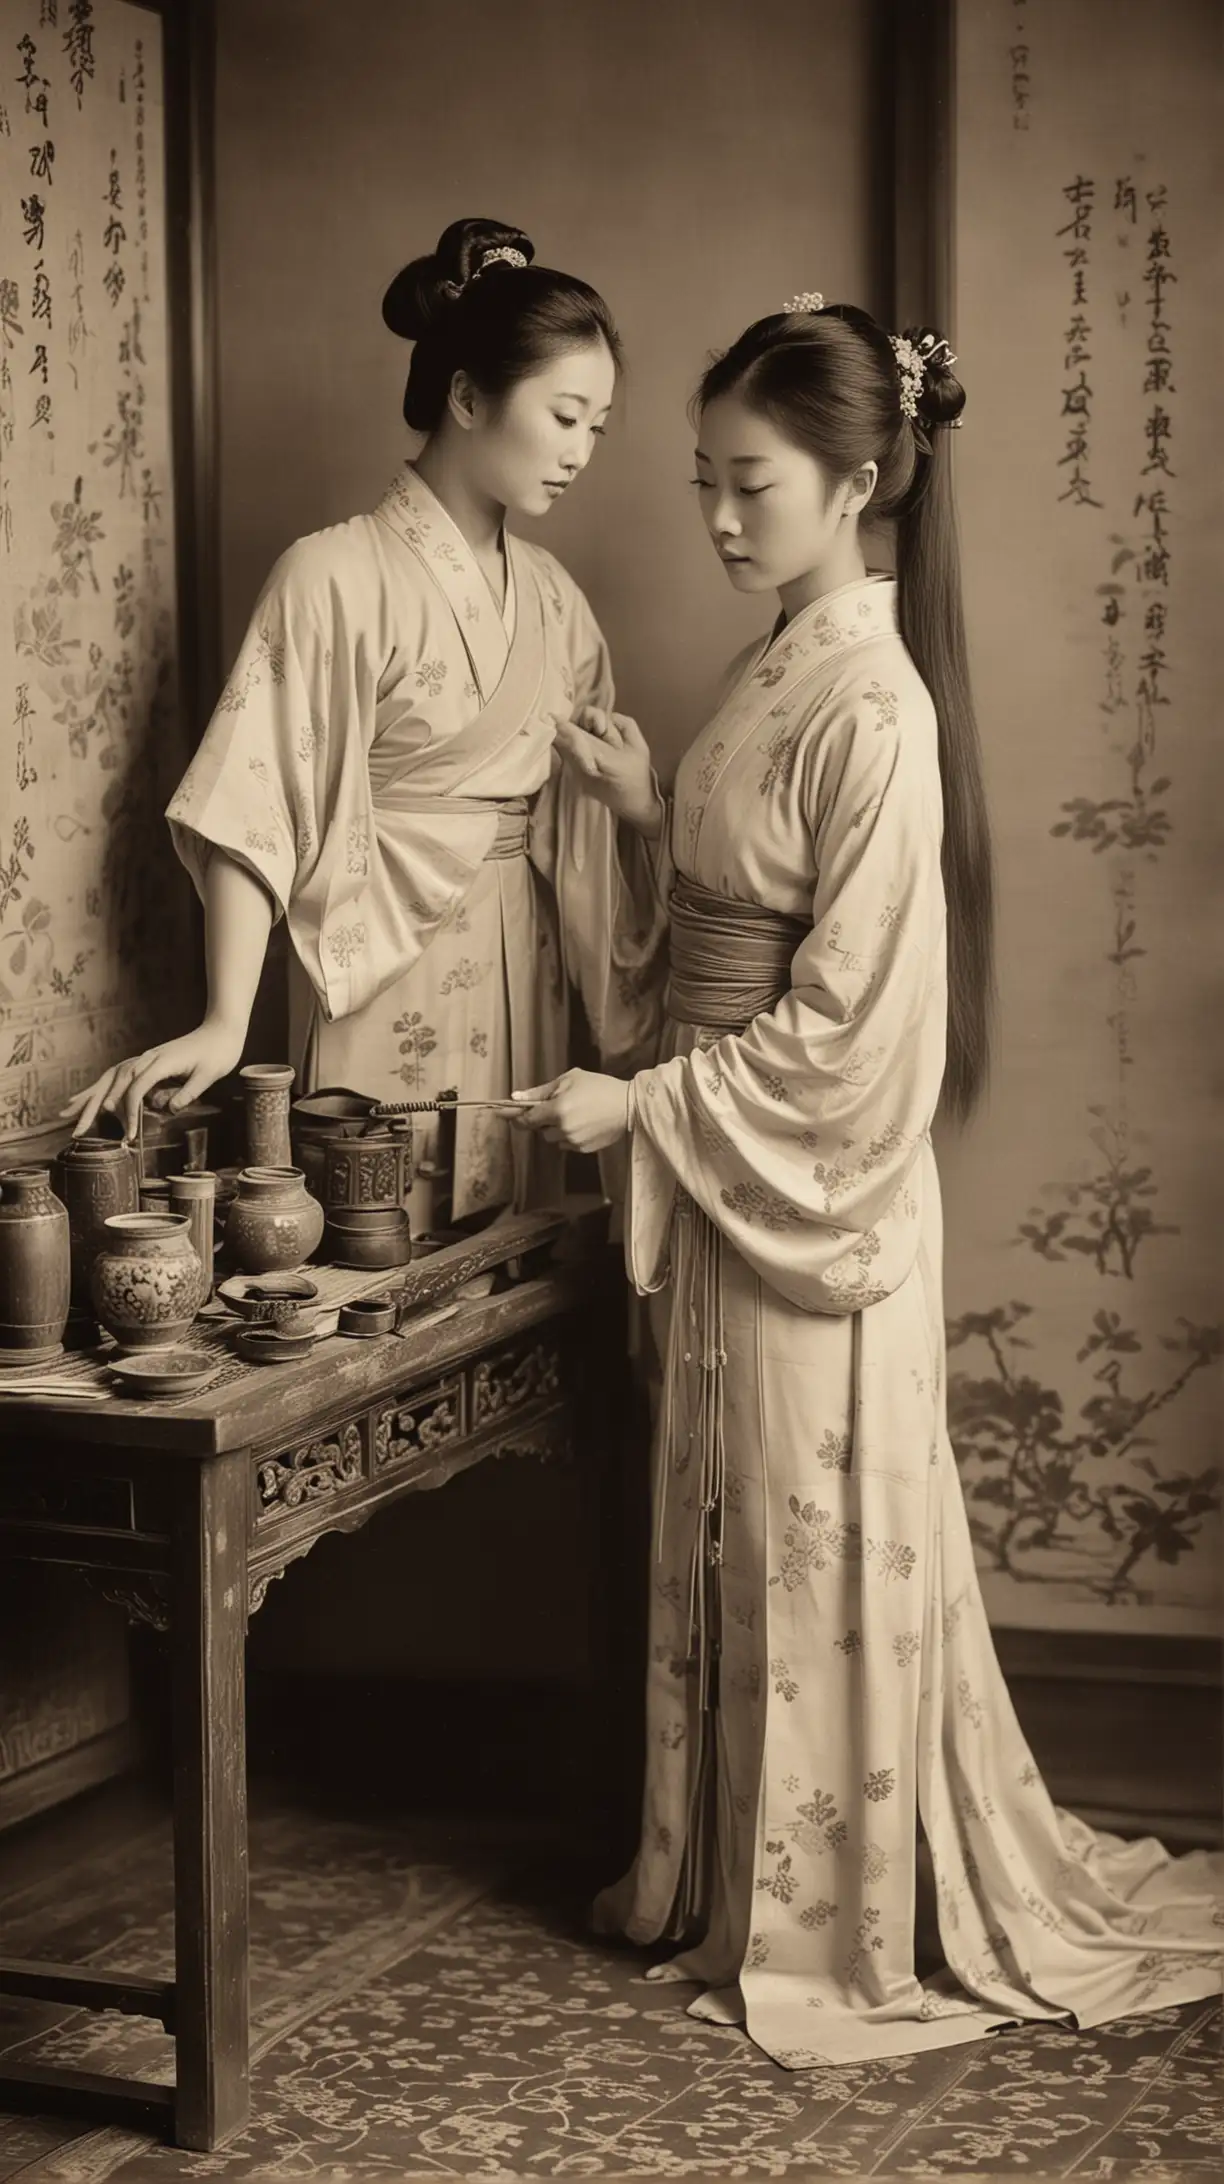 sensual Chinese concubines, applying incense to her bare body, in a small private room in 19th century Beijing 